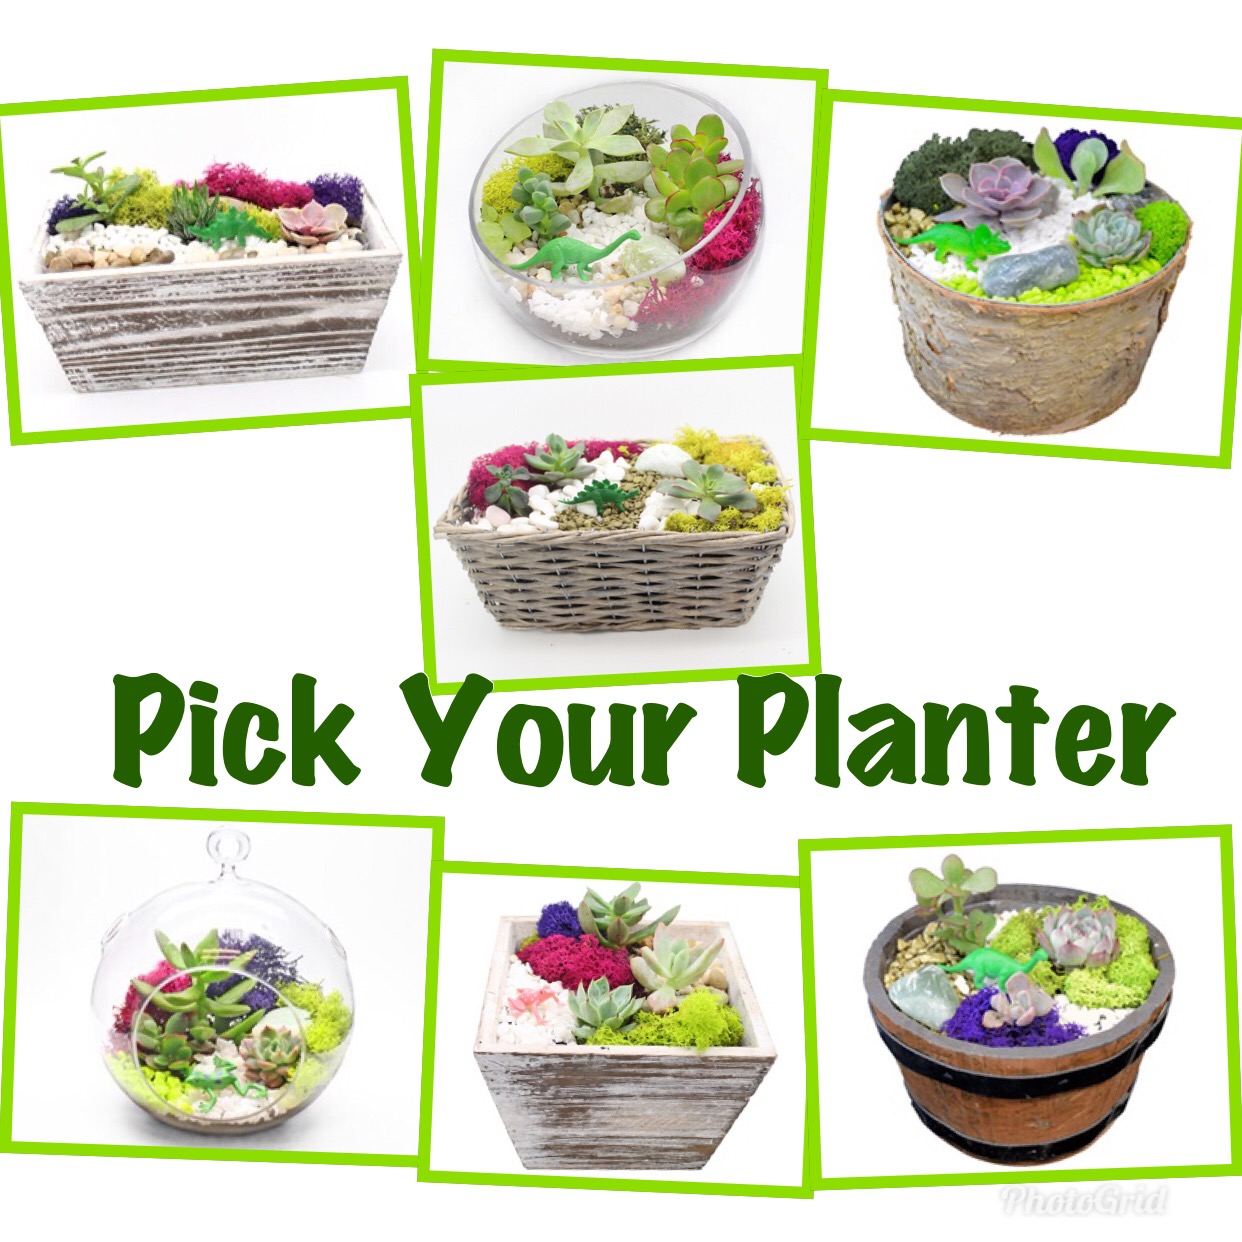 A Pick Your Planter plant nite project by Yaymaker